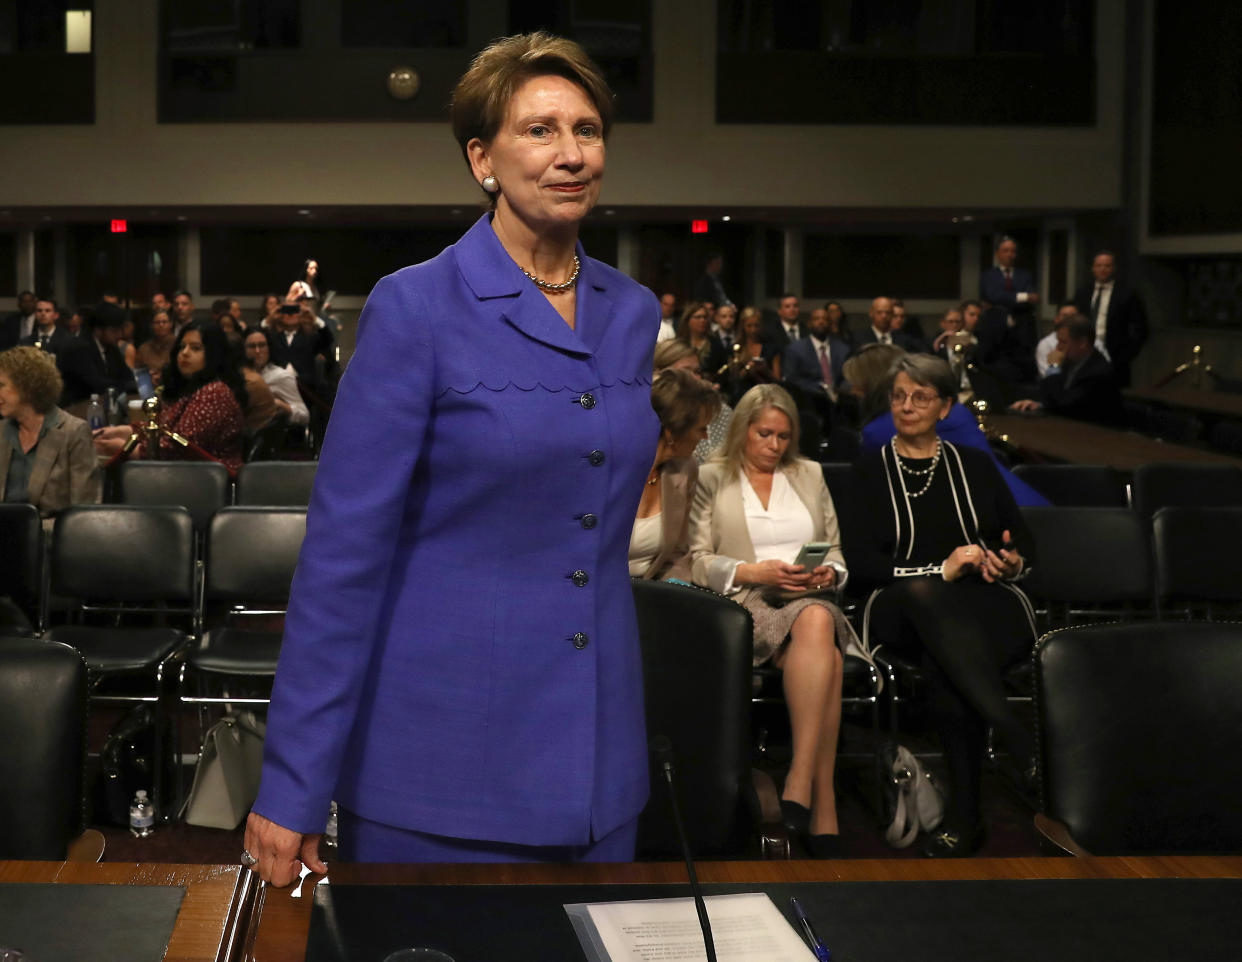 At a Senate Armed Services Committee hearing Thursday on her nomination to become as secretary of the Air Force, Barbara Barrett was quizzed about the propriety of military personnel overnighting at resorts owned by President Donald Trump. (Photo: Mark Wilson via Getty Images)